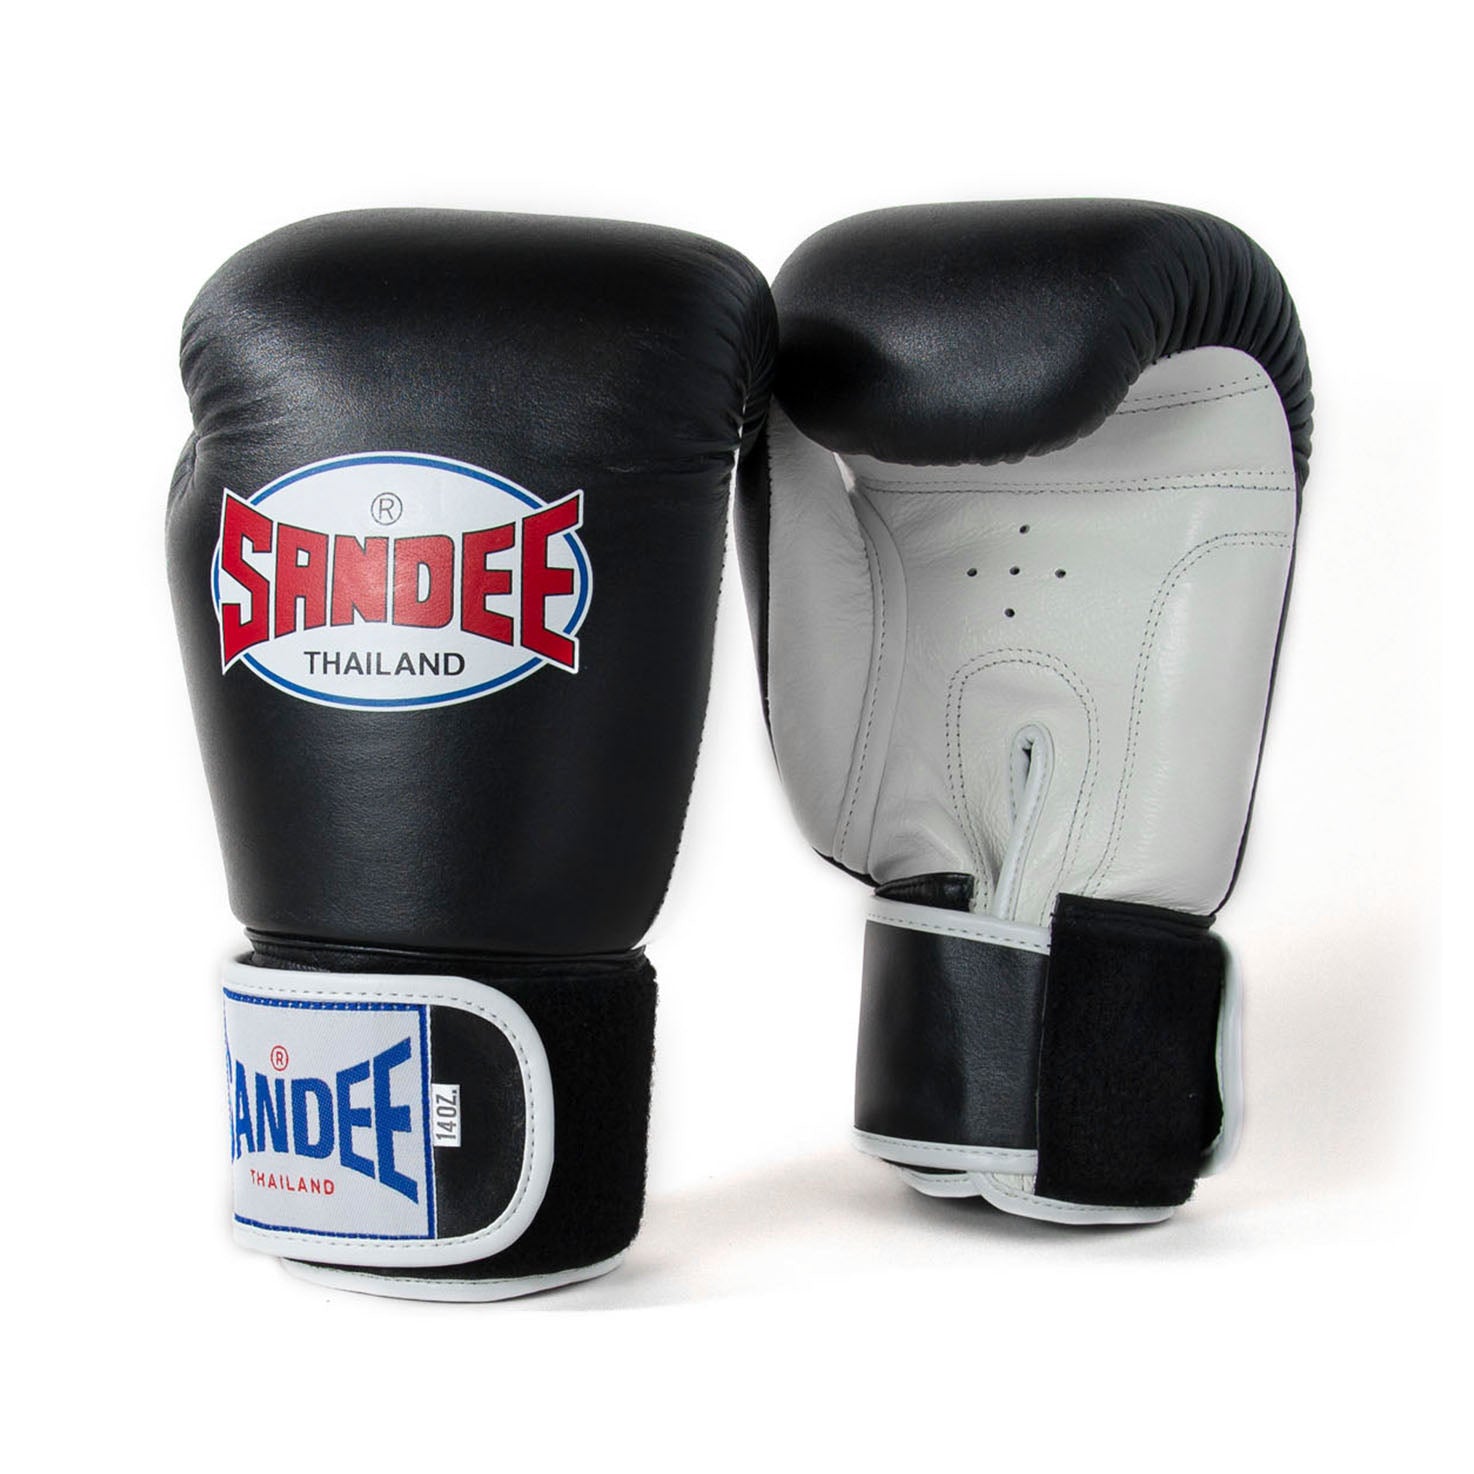 Sandee Authentic Leather Boxing Gloves